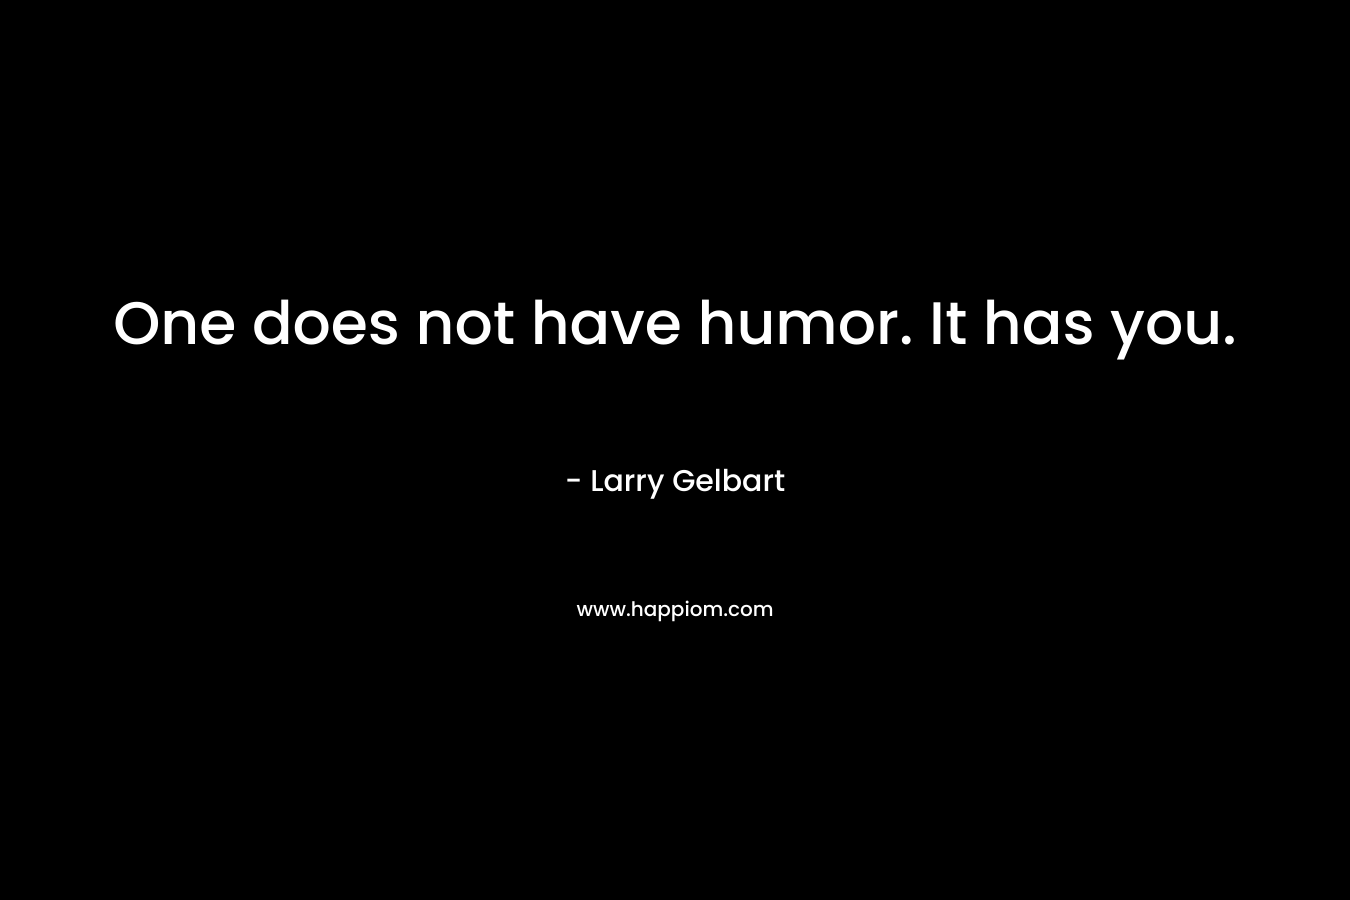 One does not have humor. It has you. – Larry Gelbart